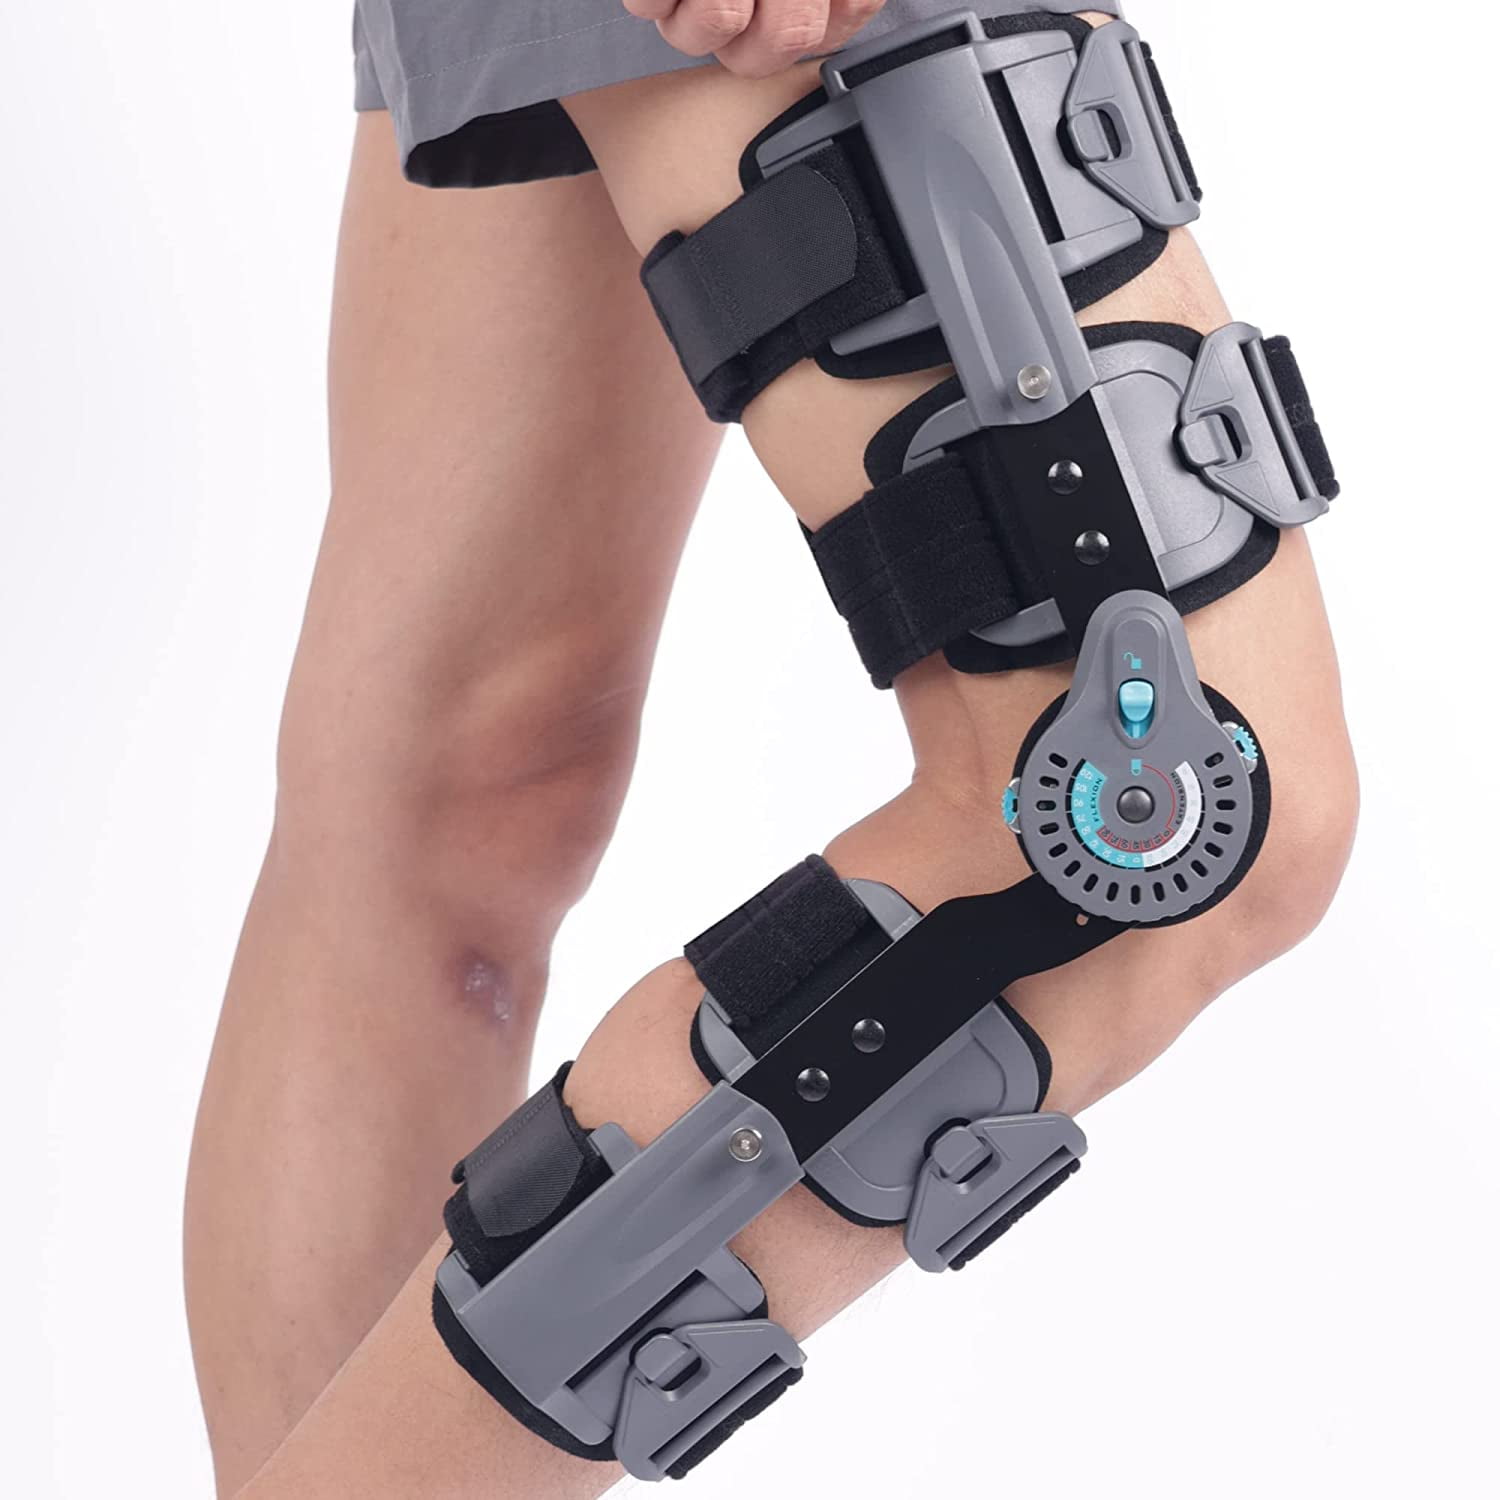 Orthomen Hinged ROM Post OP Knee Brace Immobilizer Leg Braces Support  Orthosis One Size Fits Most